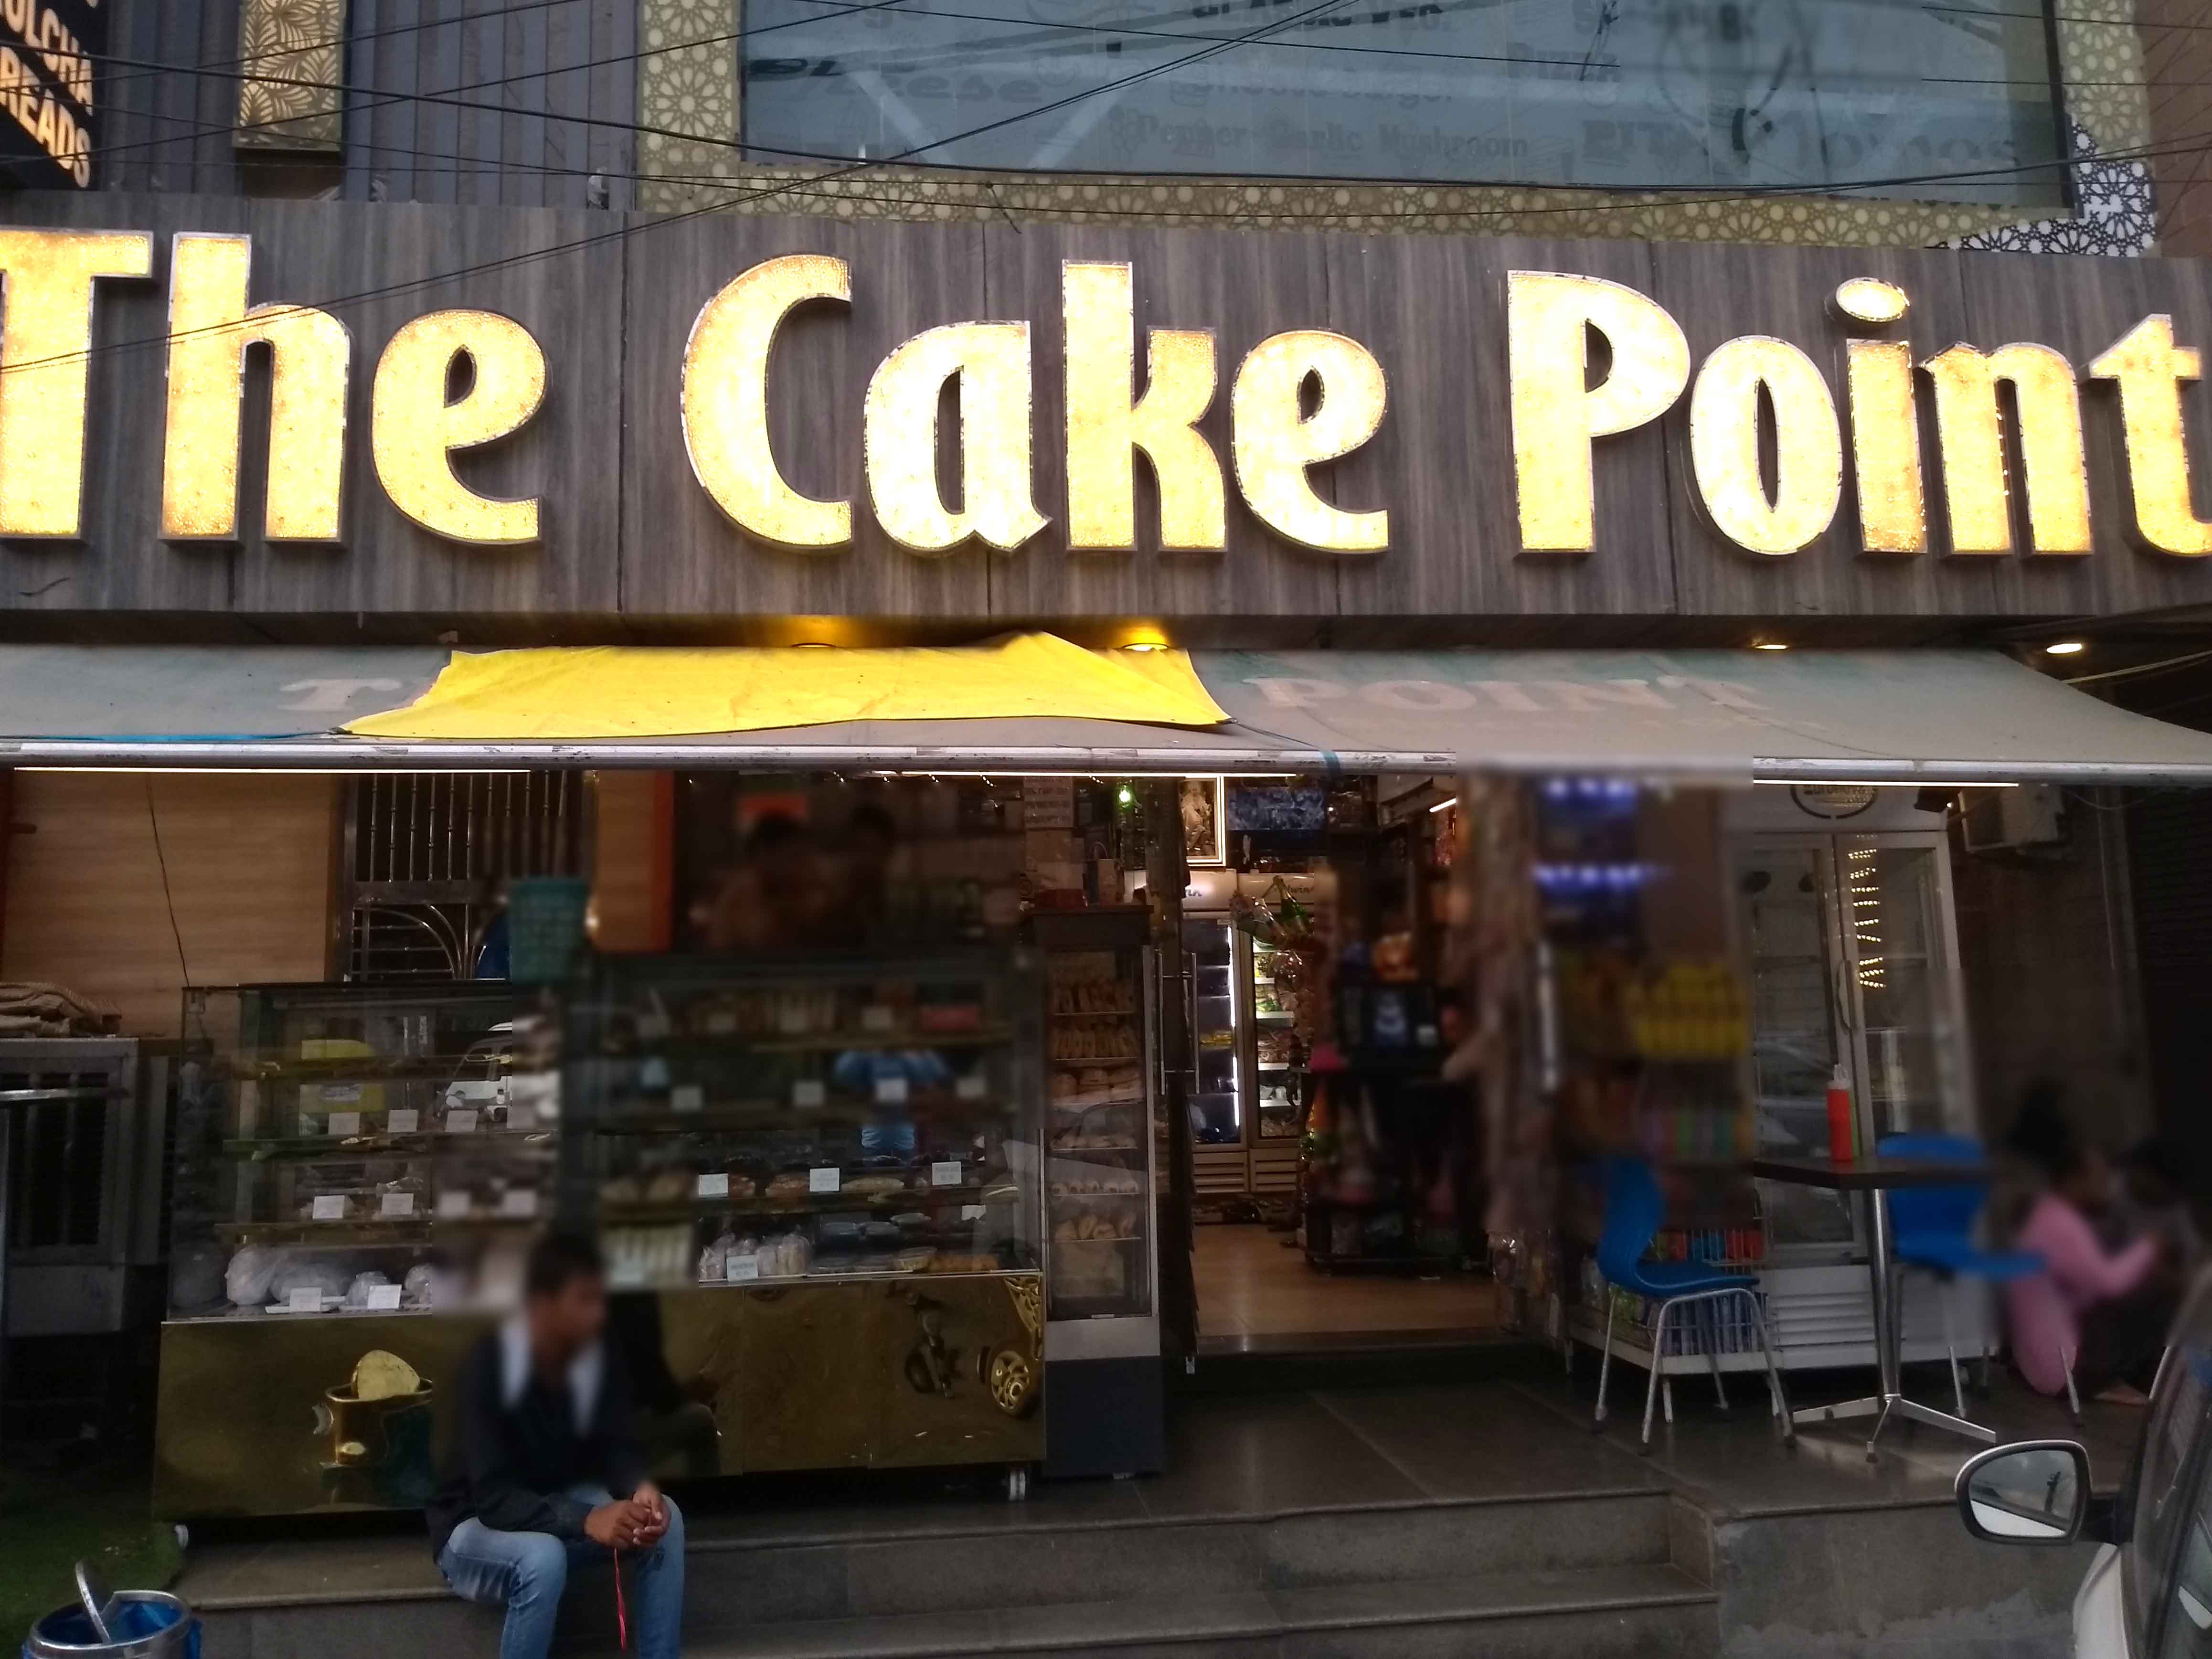 Find list of The Cake Point in Lajwanti Garden - Cake Point Cake Shops  Delhi - Justdial